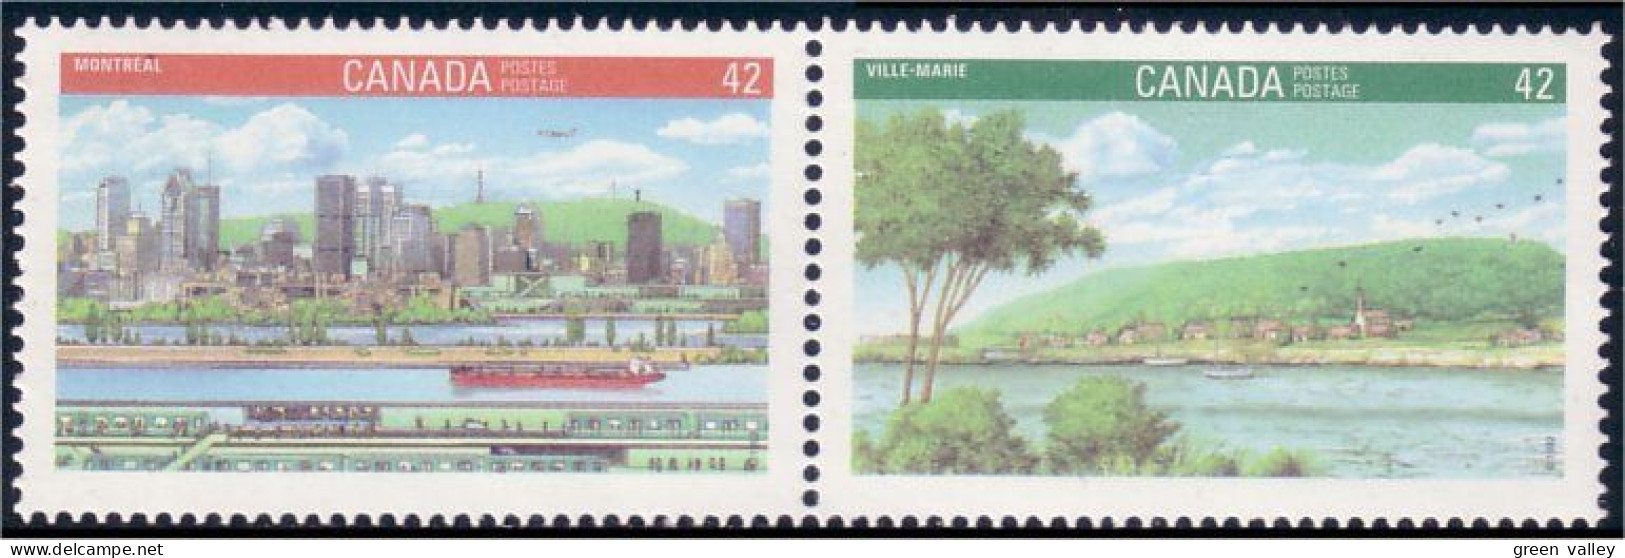 Canada Expo Canada 92 Montreal Ville-Marie MNH ** Neuf SC (C14-05aa) - Neufs